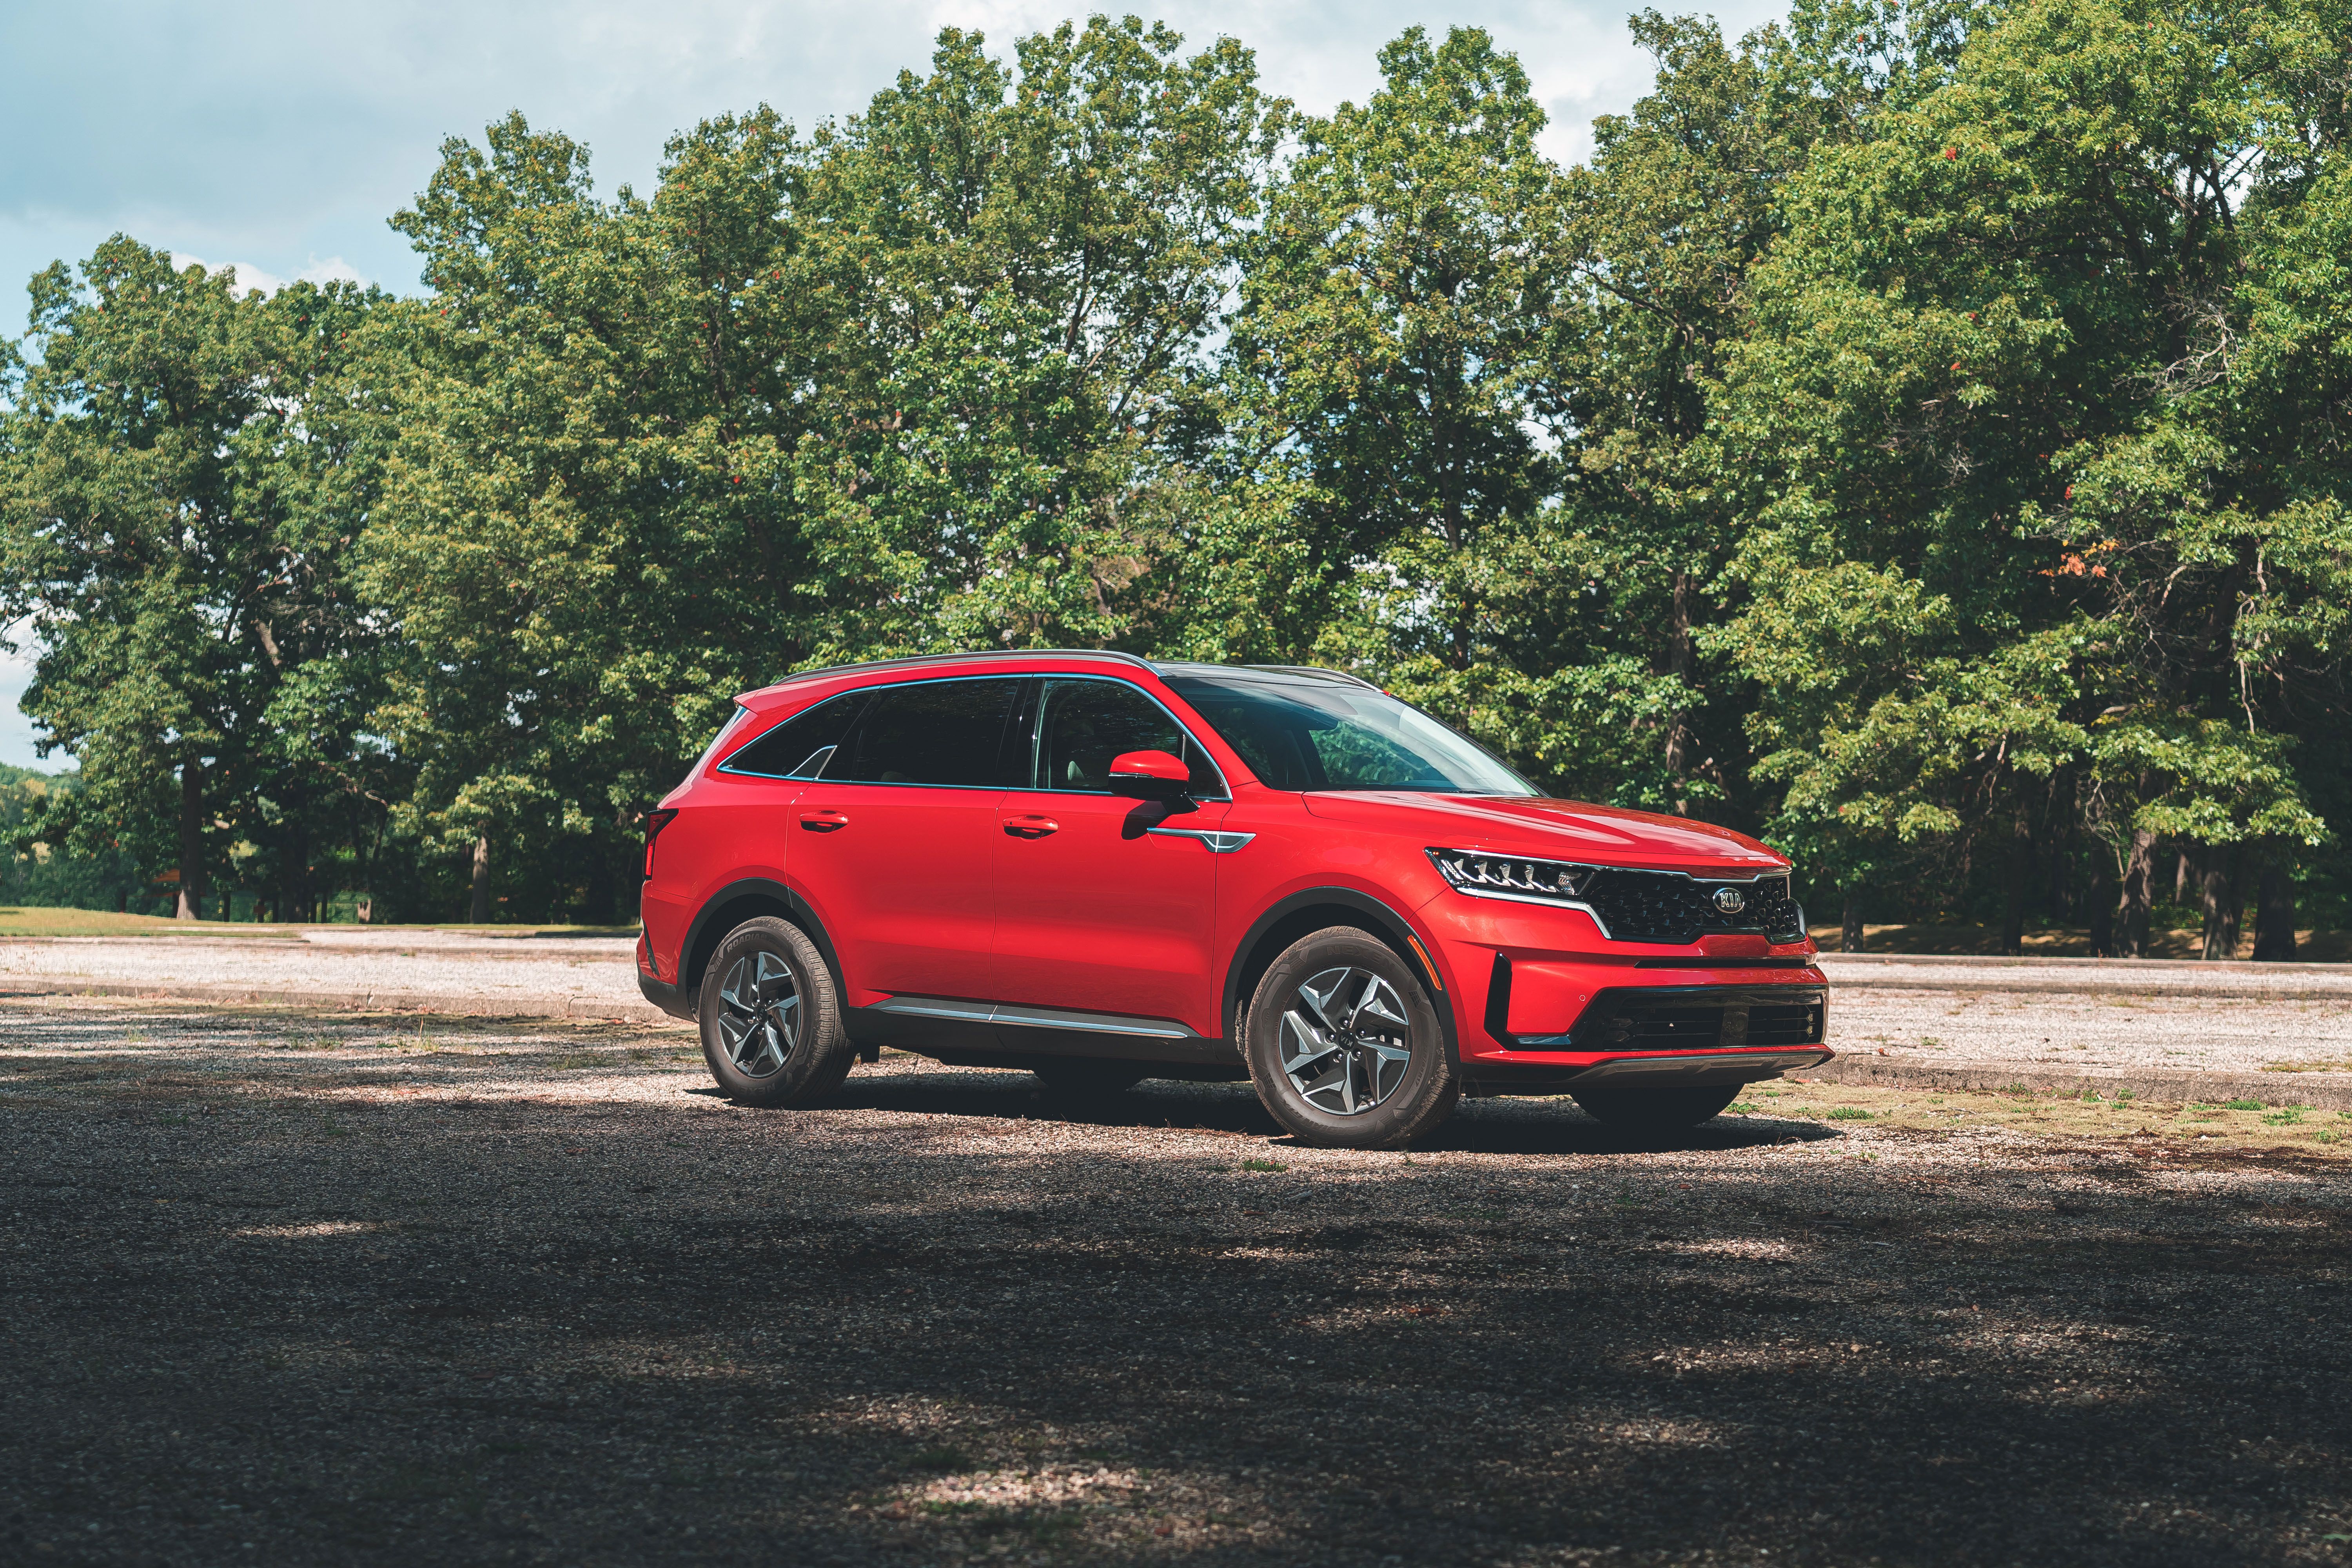 Tested: 2021 Kia Sorento Is Compelling in Hybrid Form